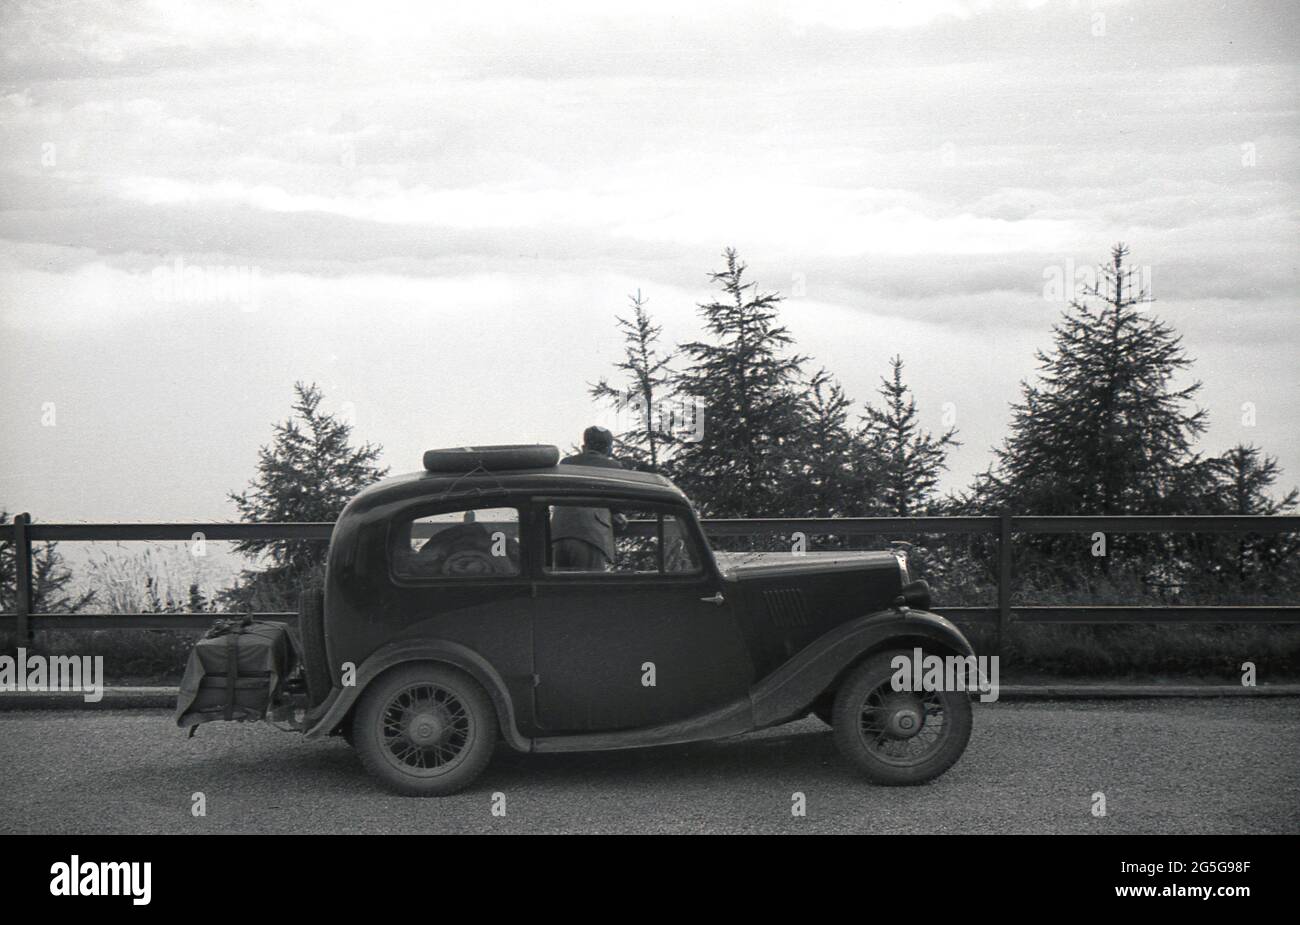 1934, historical, touring Bohemia, the western part of Czechoslavia pre-WW2. A young man standing by his car, a British Morris Eight looking over the surrounding landscape. This area of Czechoslovakia was known and referred to at this time as the Sudetenland, the historical name for the sudeten German people living in the western Czech lands of Bohemia and other border areas. Stock Photo